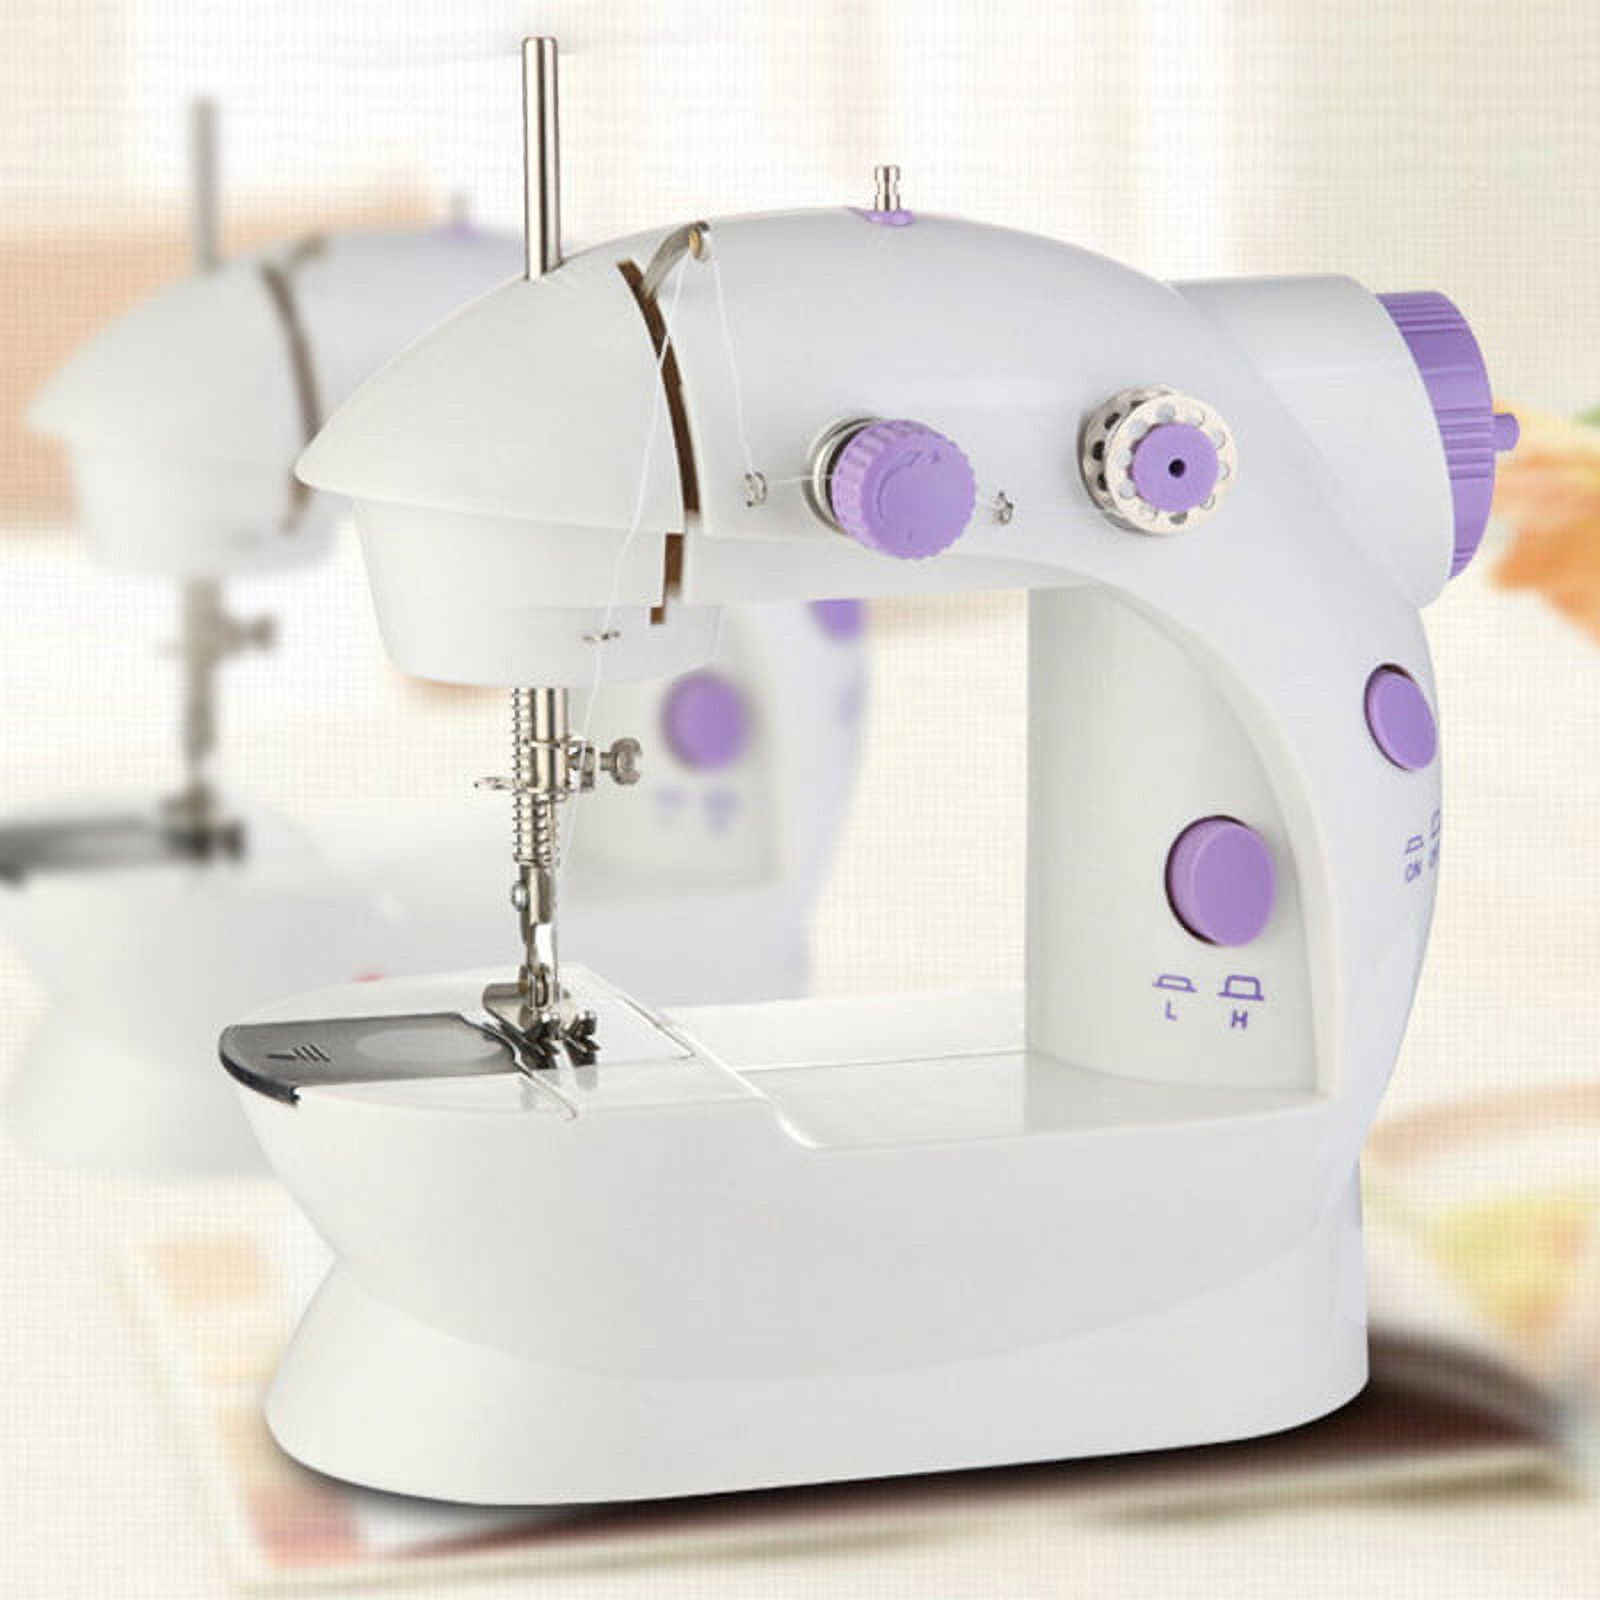 7.87"x7.48"x3.9" Kids Crafts Portable Mini Sewing Machine with Led   Light for Beginners 2 Speed Multi-functional Suitable Sewing Kit for Household - image 4 of 13